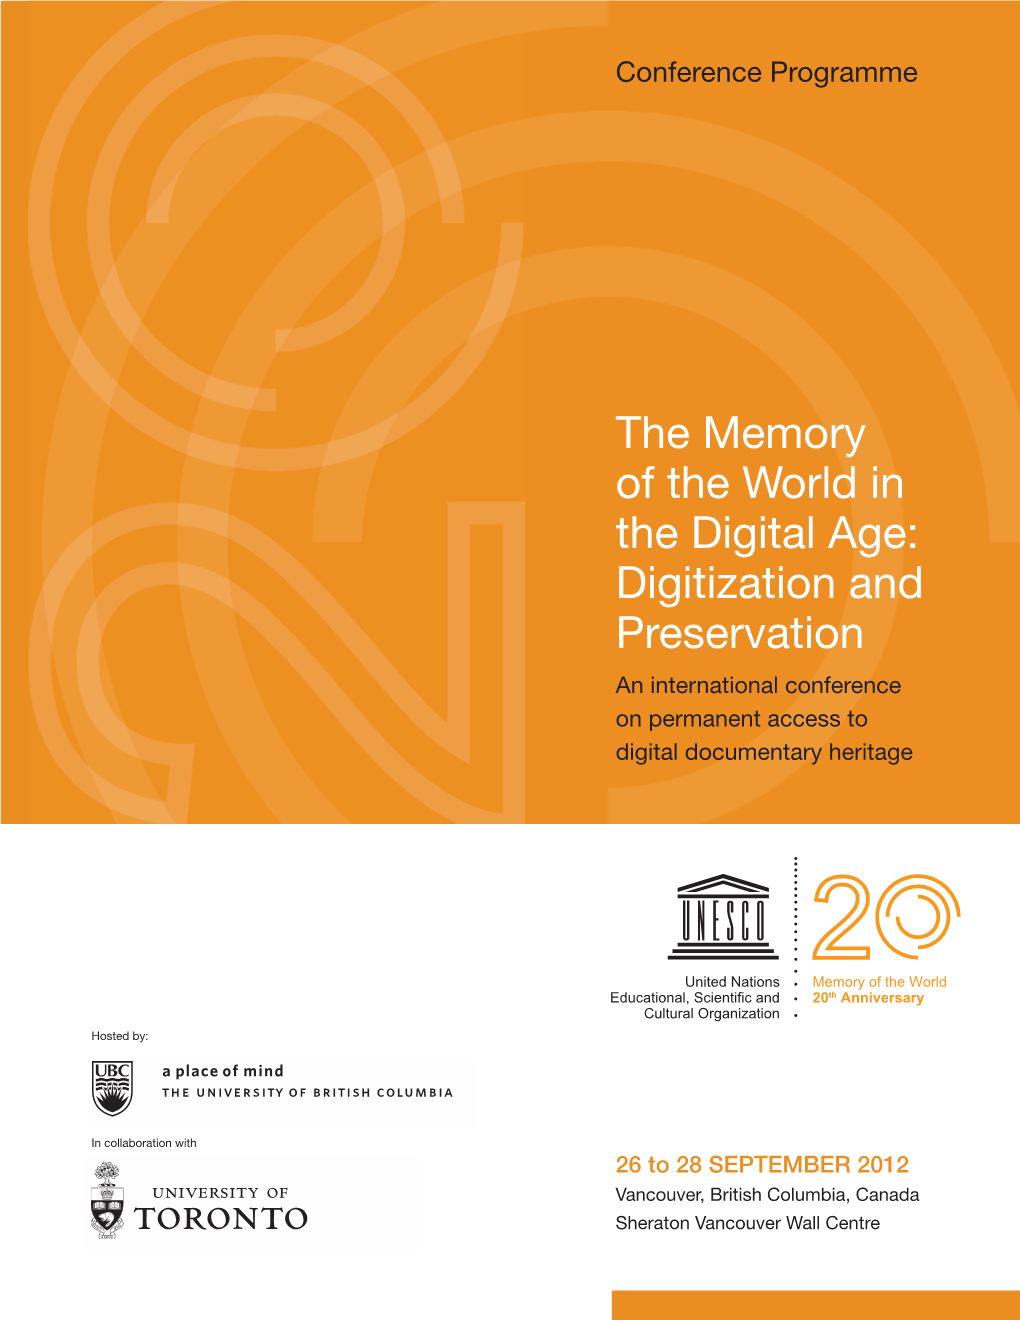 The Memory of the World in the Digital Age: Digitization and Preservation an International Conference on Permanent Access to Digital Documentary Heritage